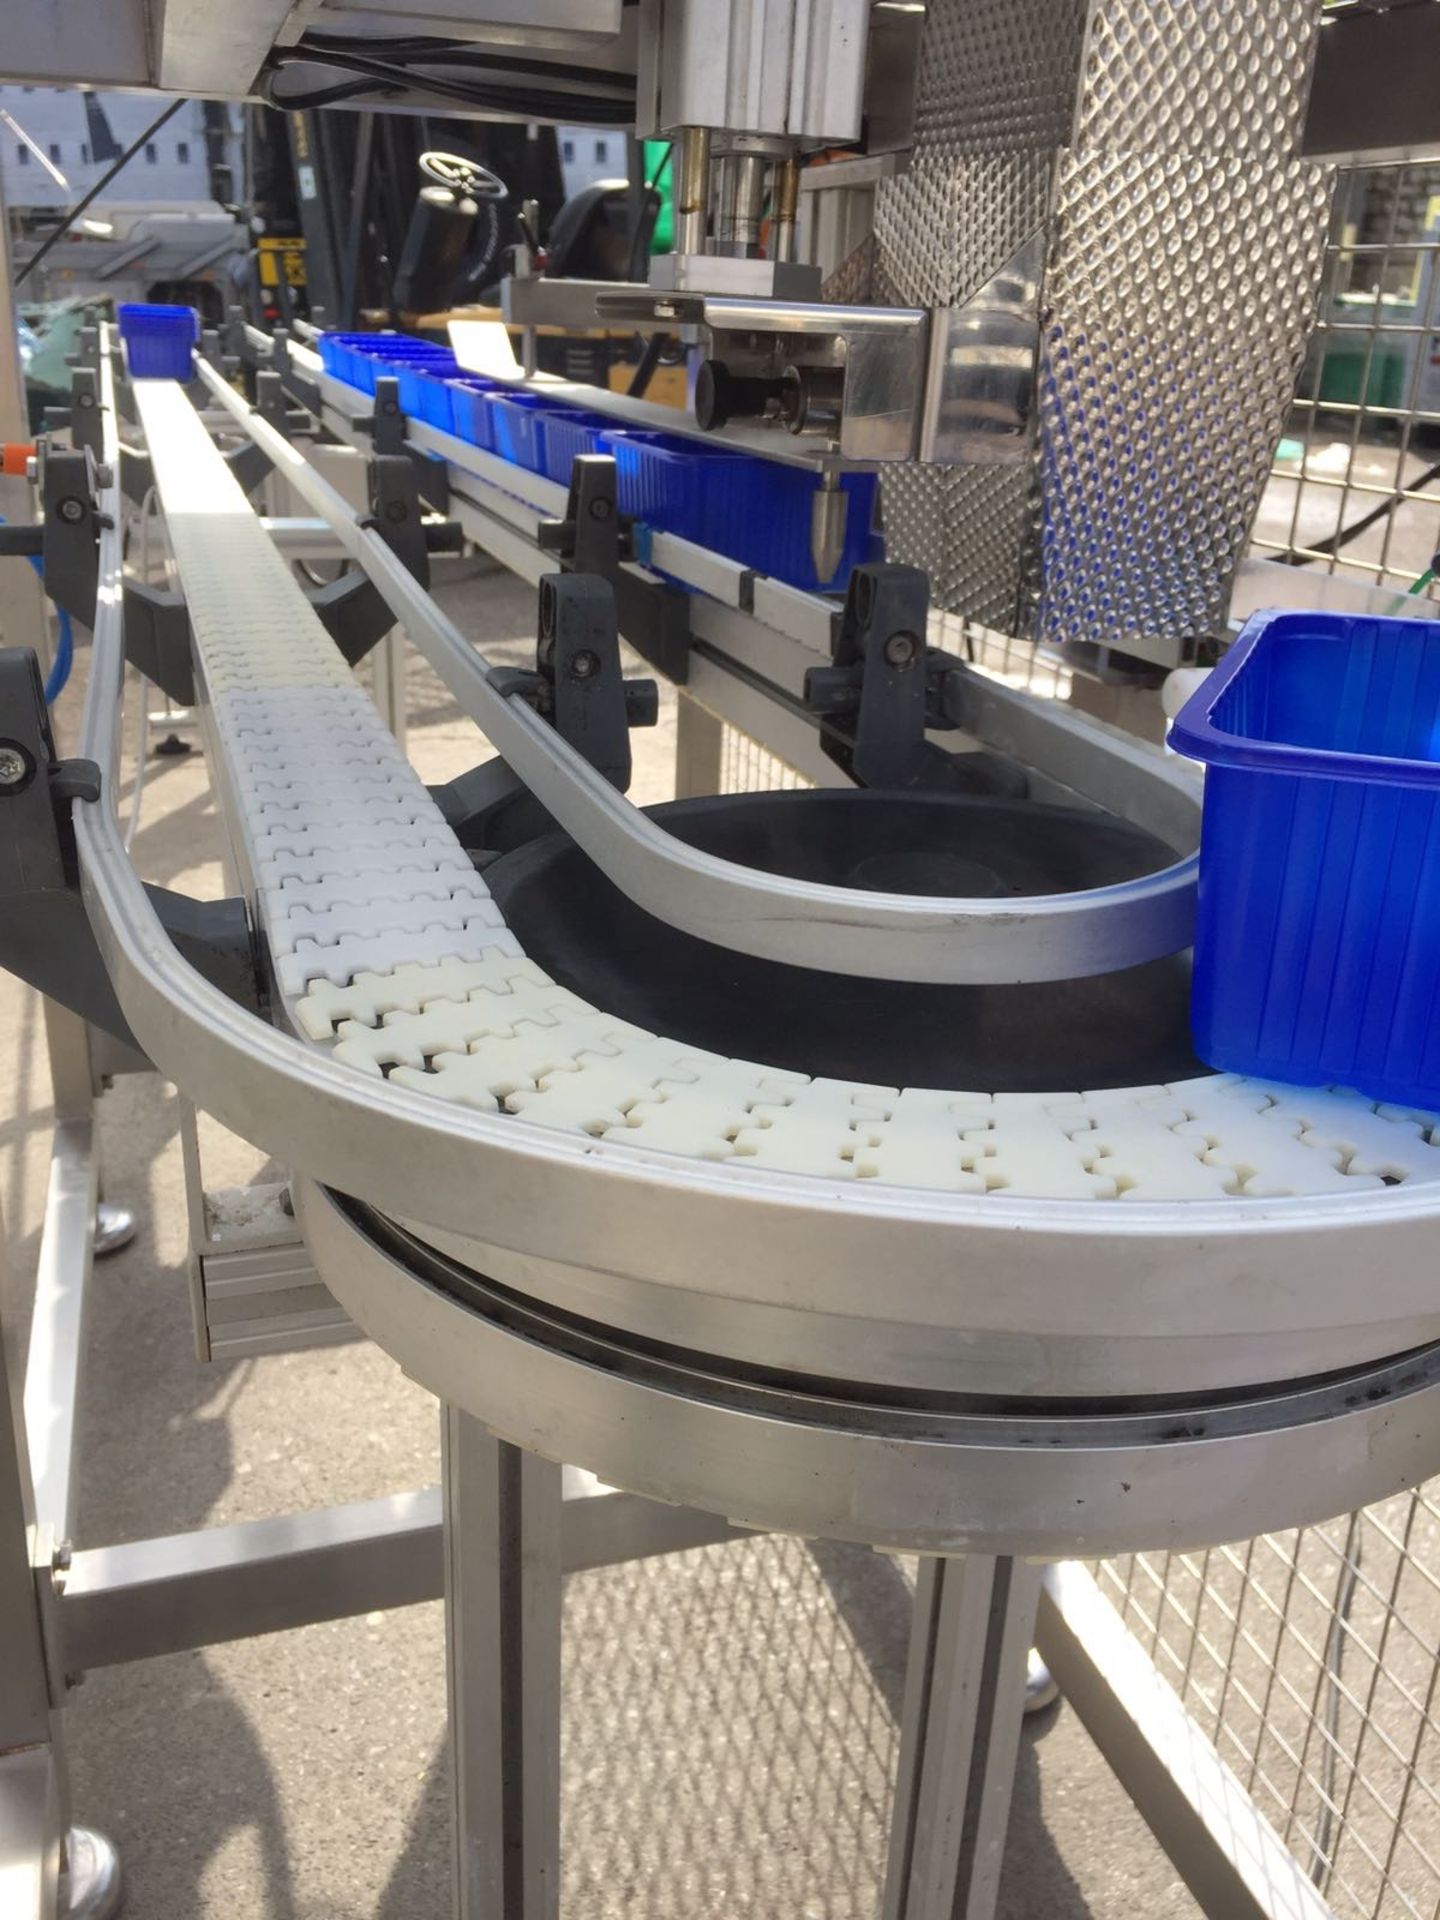 Easy weigh Twin Linear weigher with conveyor for Auto filling into punnets touch screen control s/s - Image 2 of 11